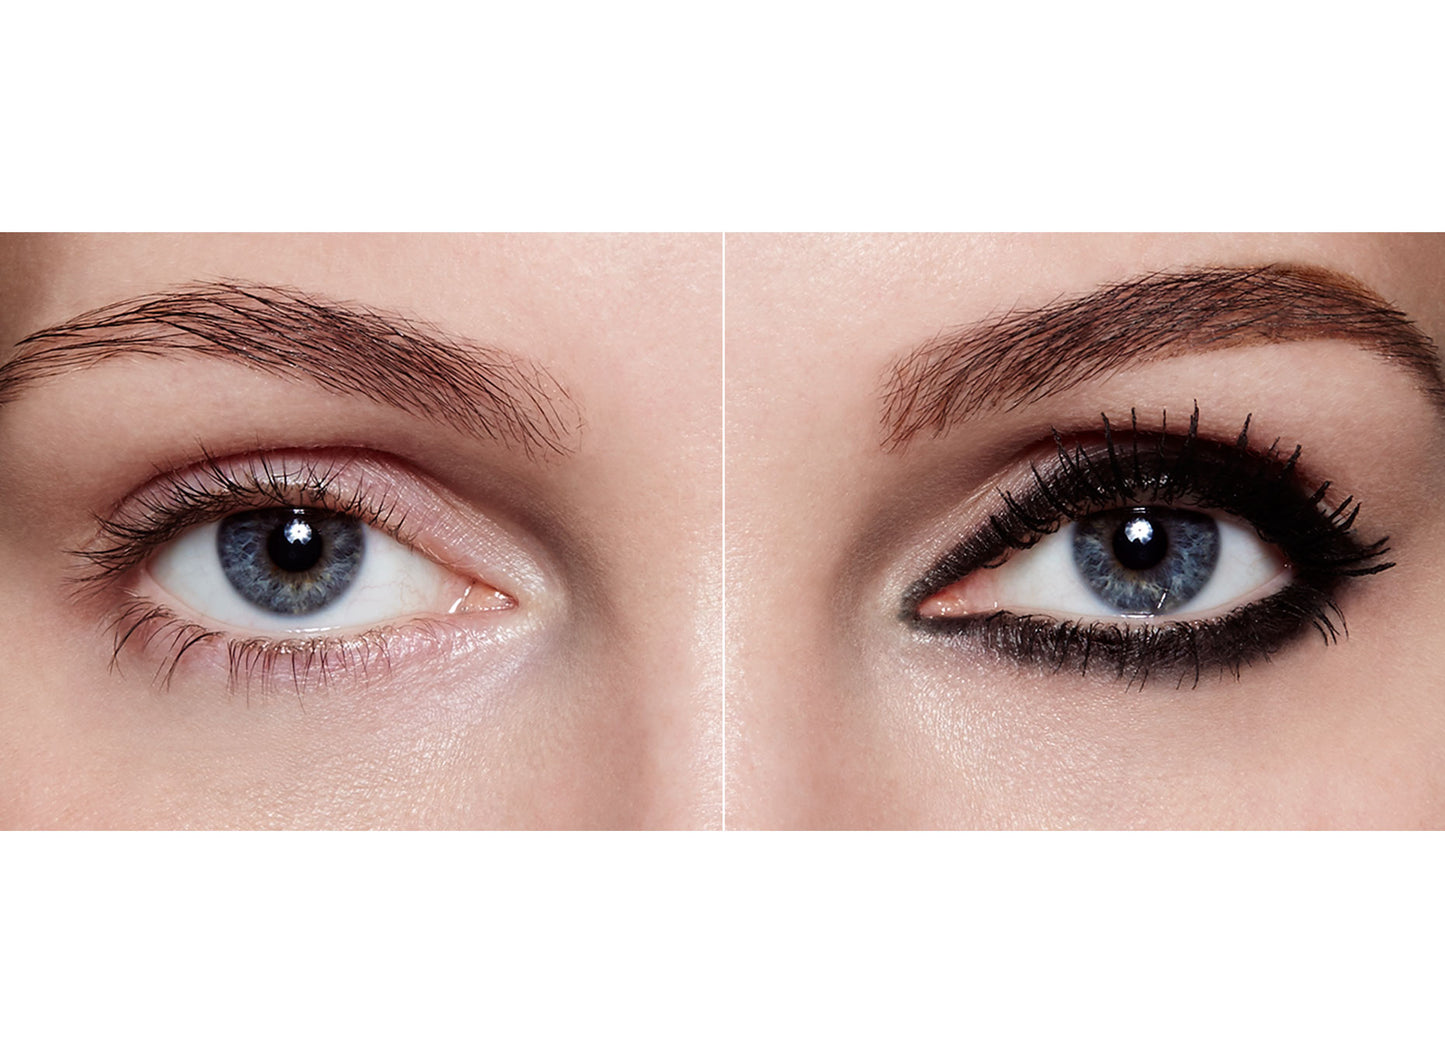 before and after using the Lash Star Beauty waterproof gel eyeliner